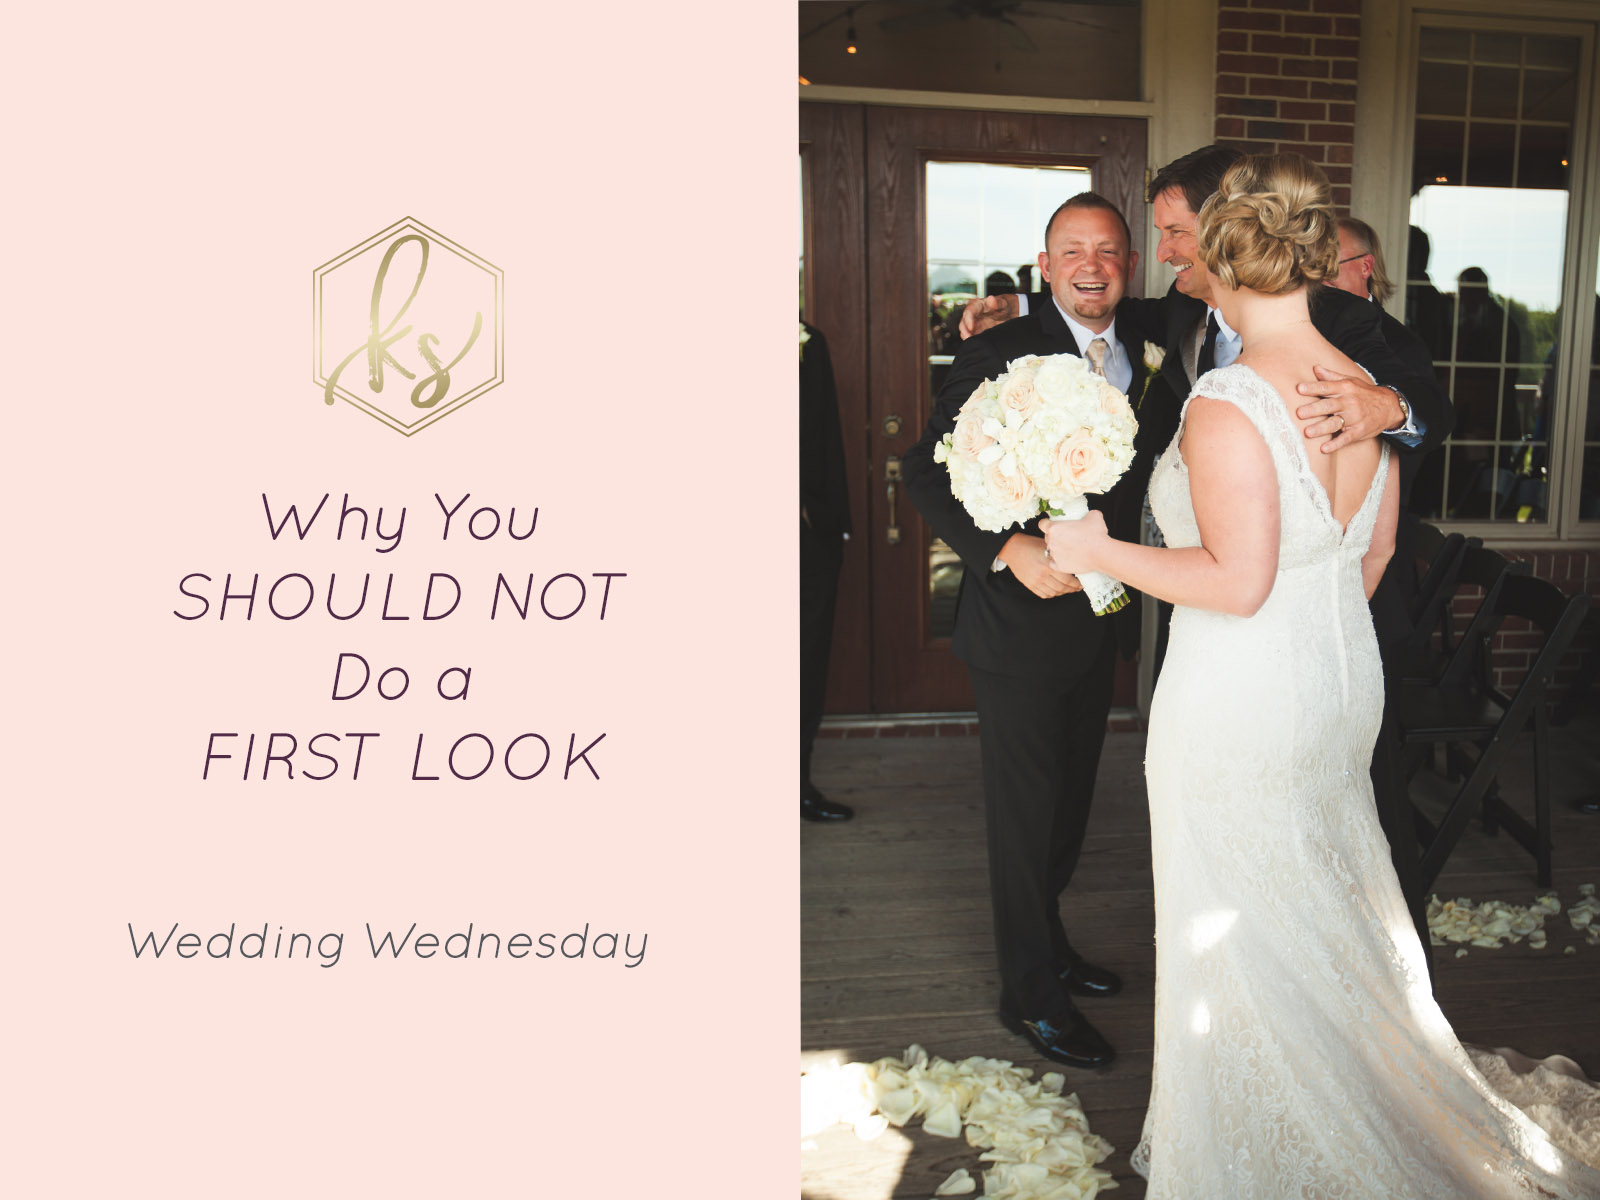 Why you should not have a first look